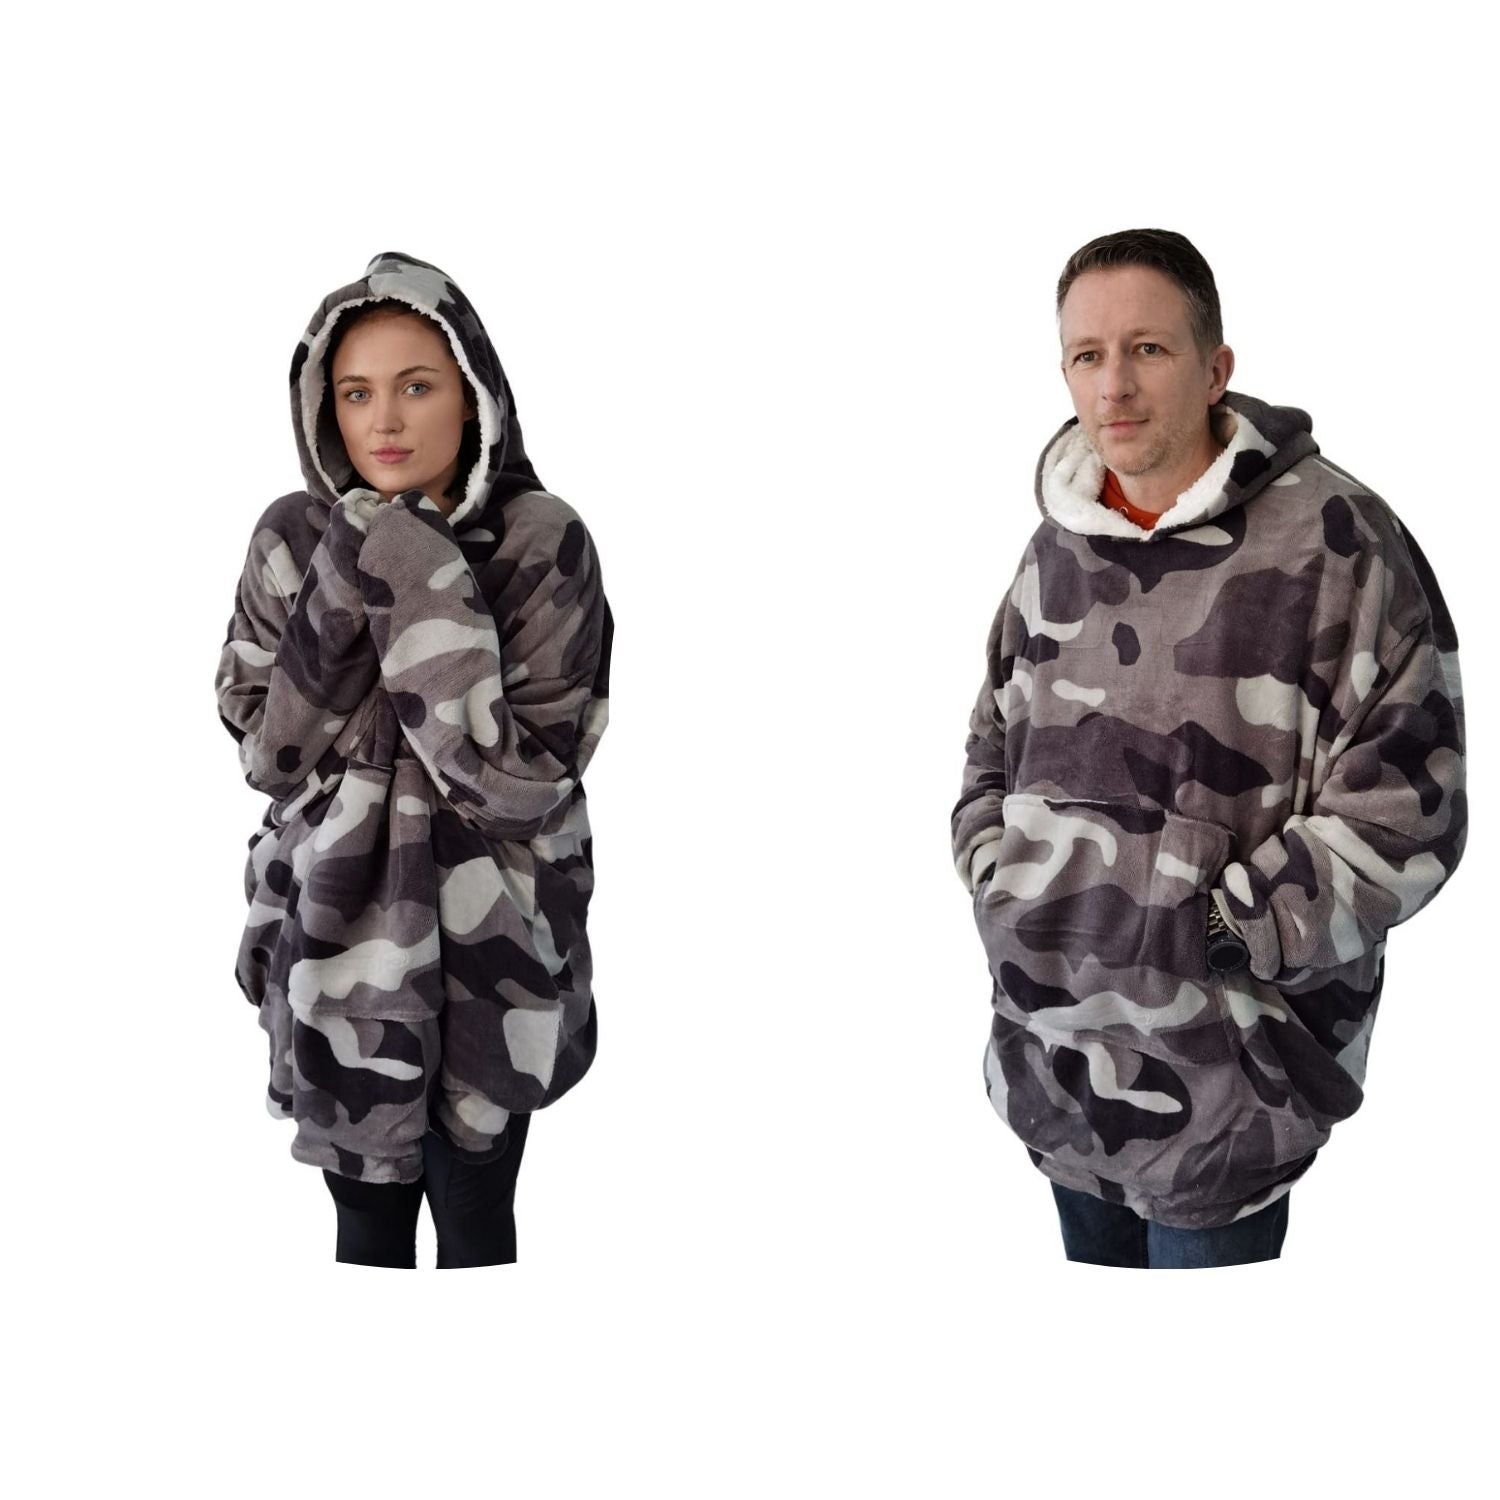 The Home Bedroom Cosy Robe - Camouflage Grey 4 Shaws Department Stores